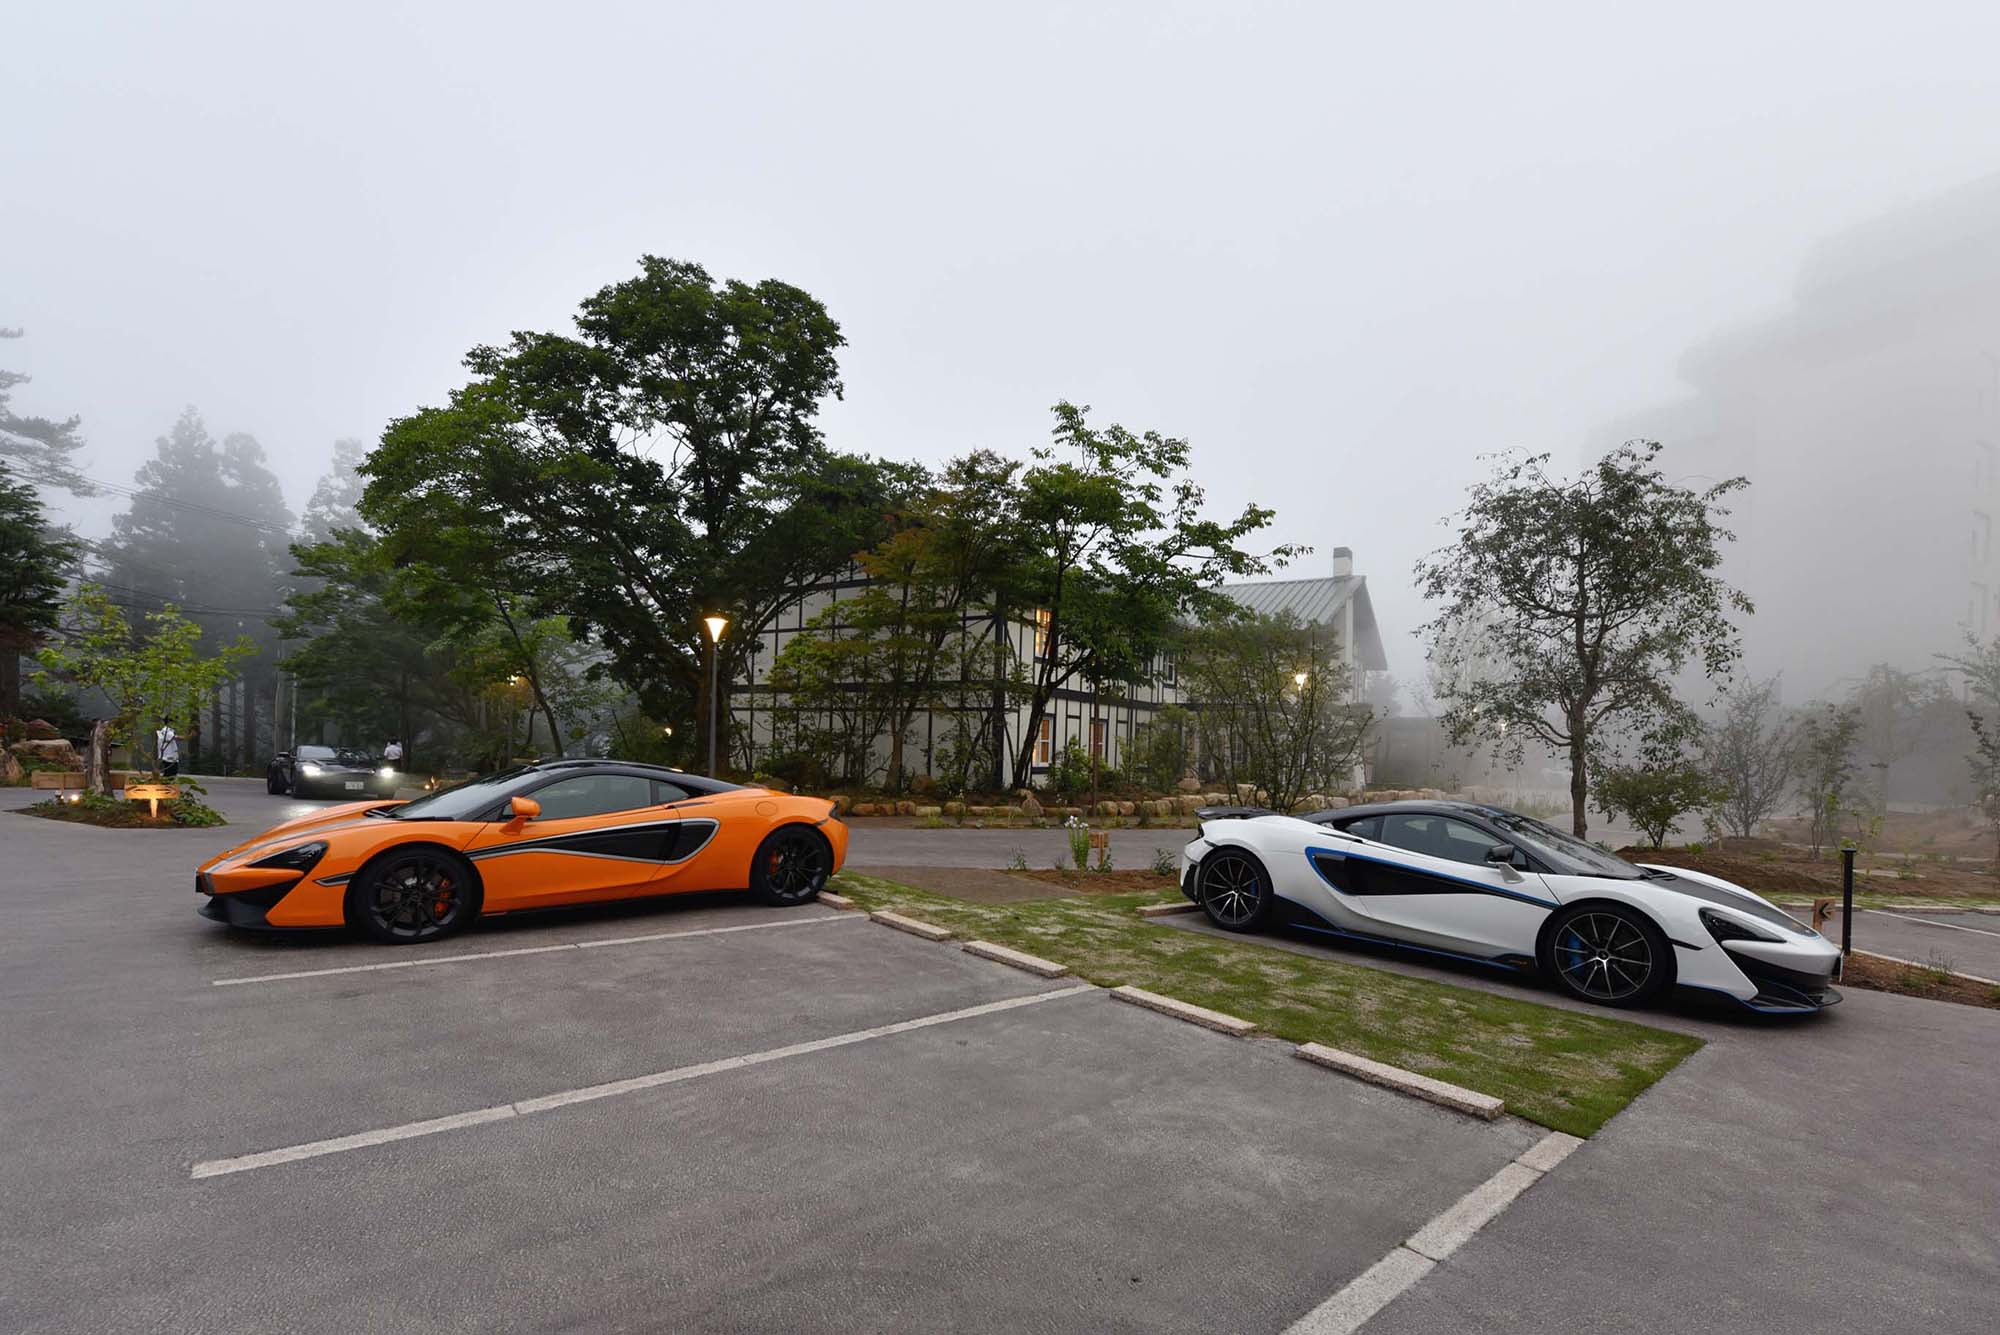 The hotel is an ideal hideaway for the car owners of McLaren and Aston Martin.